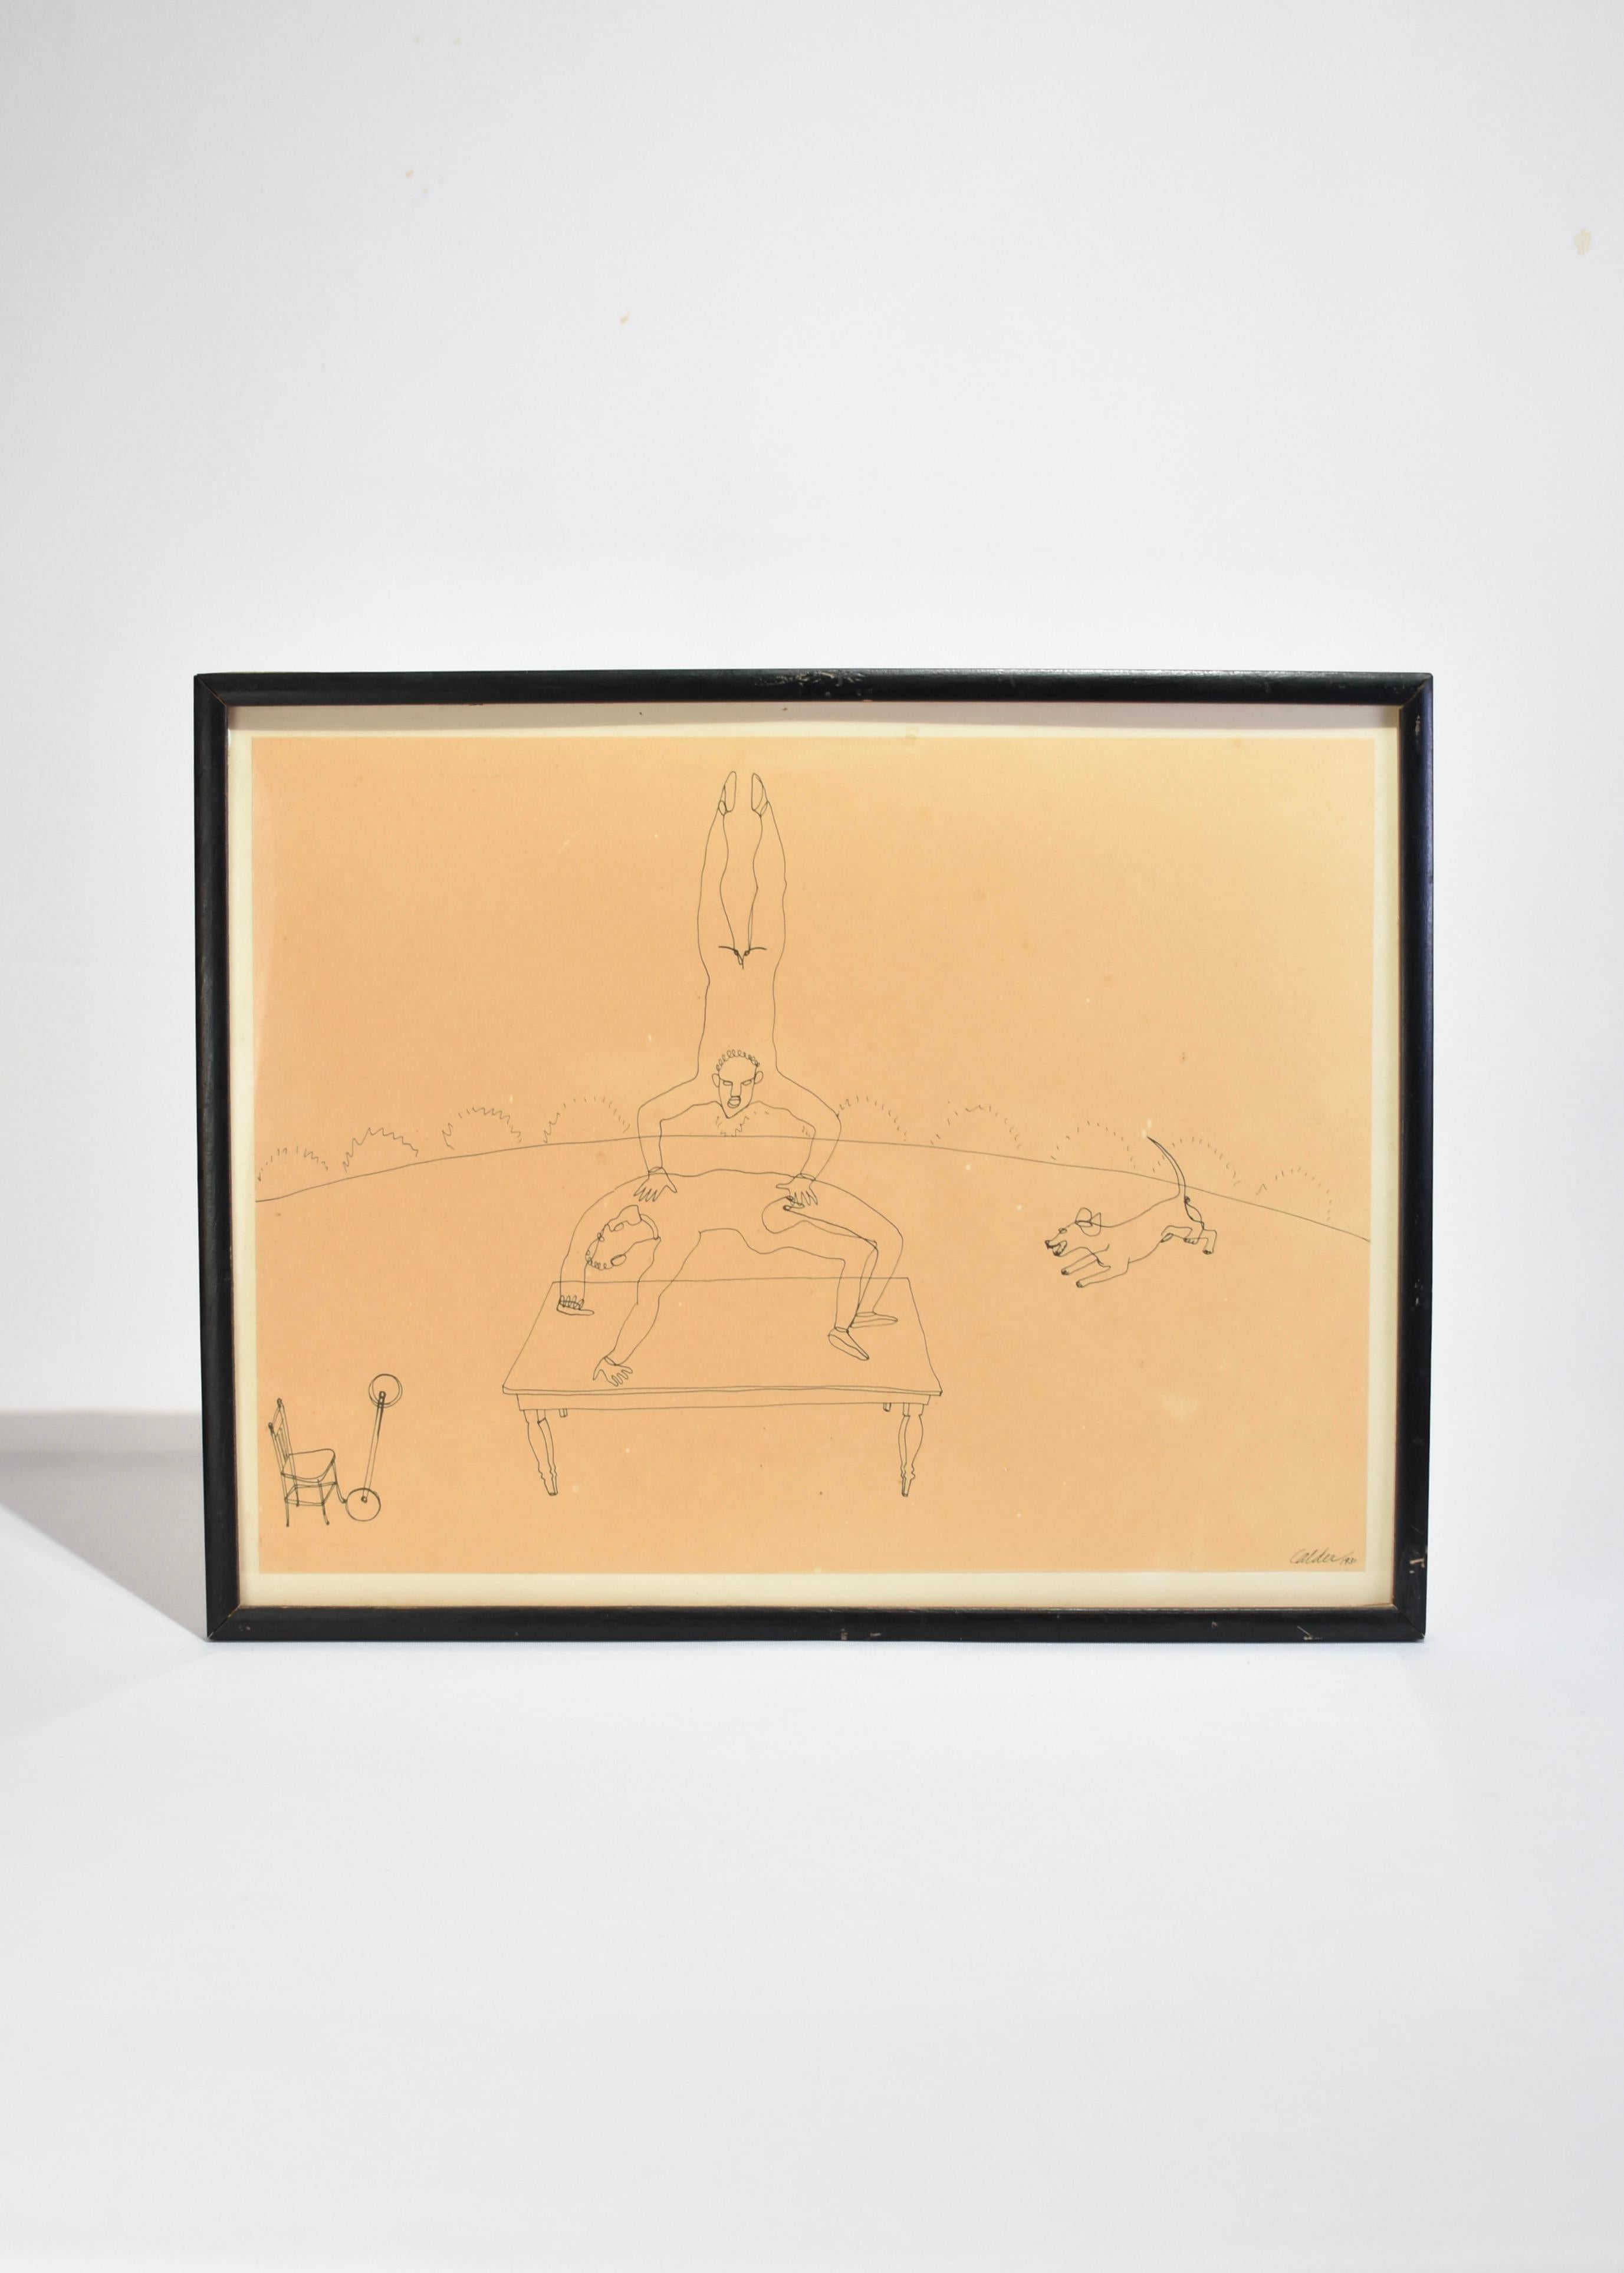 Framed offset lithograph from Alexander Calder's Circus, originally printed in 1964 by Art in America with Perls Galleries New York. Rare limited edition of 100.

Each lithograph is framed with a bar on backside for wall hanging and signed in the